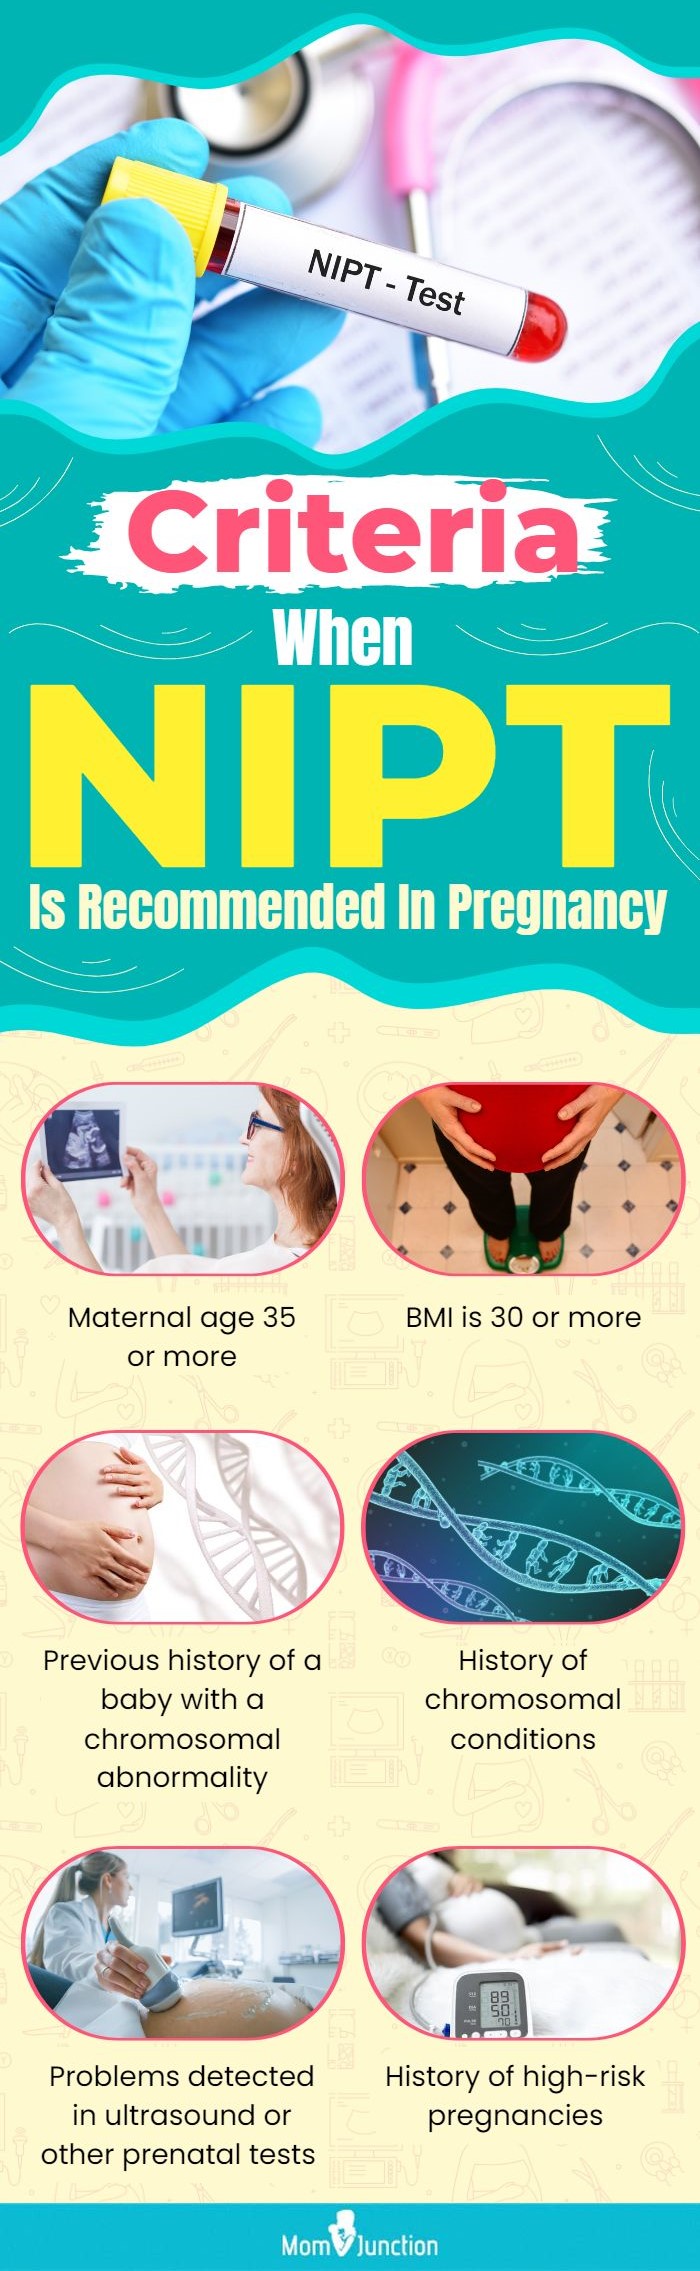 criteria when nipt is recommended in pregnancy (infographic)